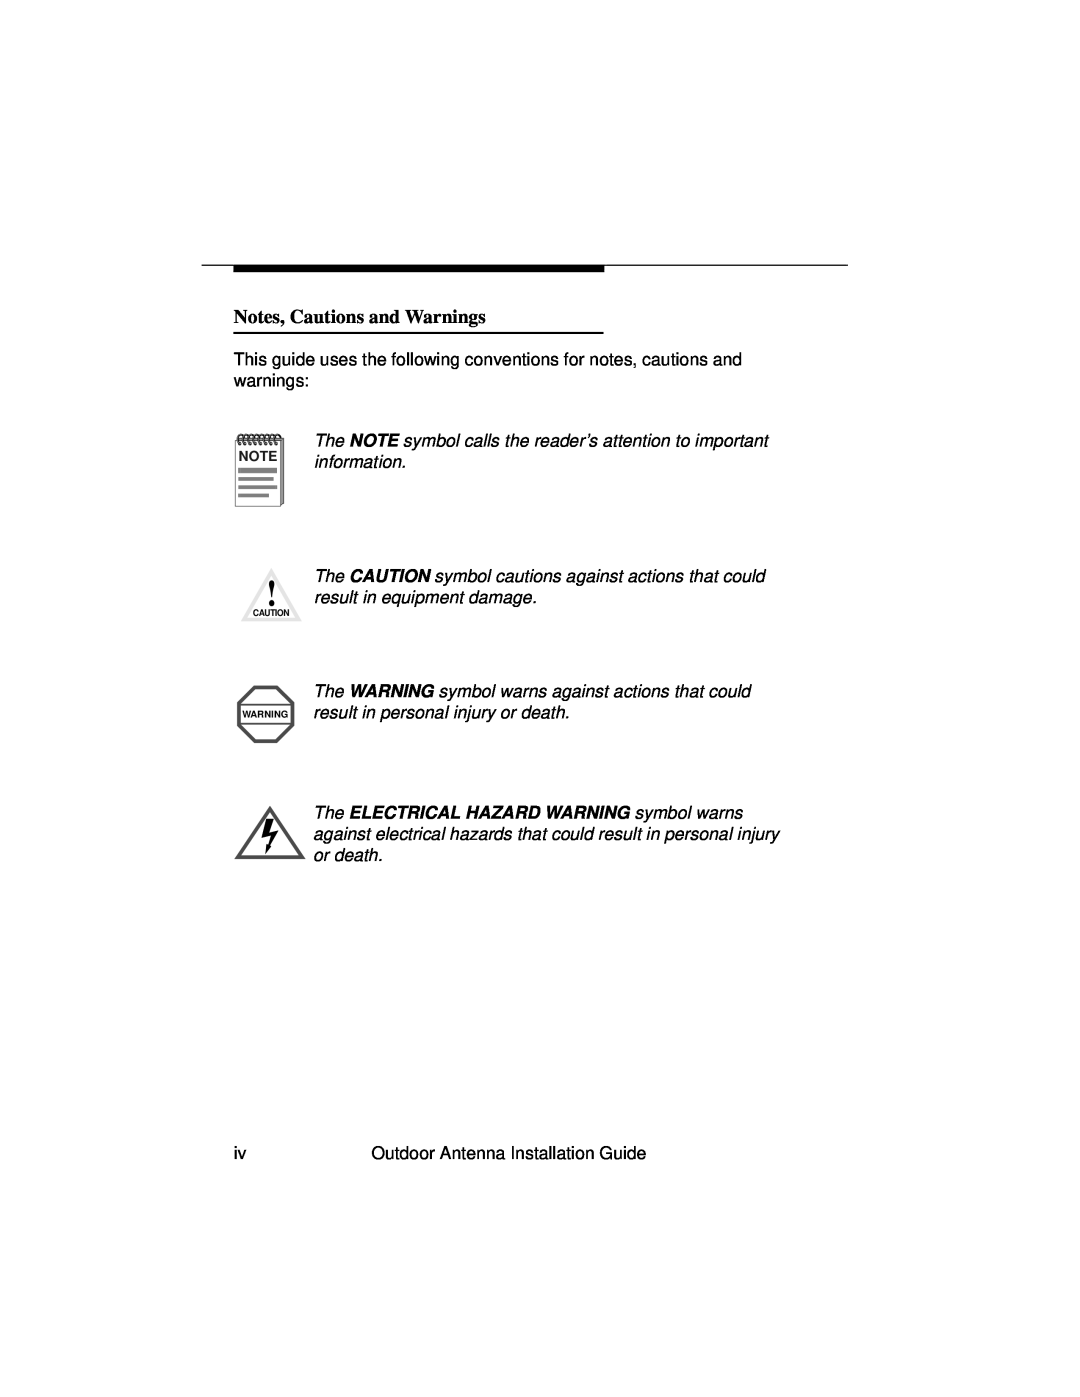 Cabletron Systems 9033073 manual Notes, Cautions and Warnings, Outdoor Antenna Installation Guide 